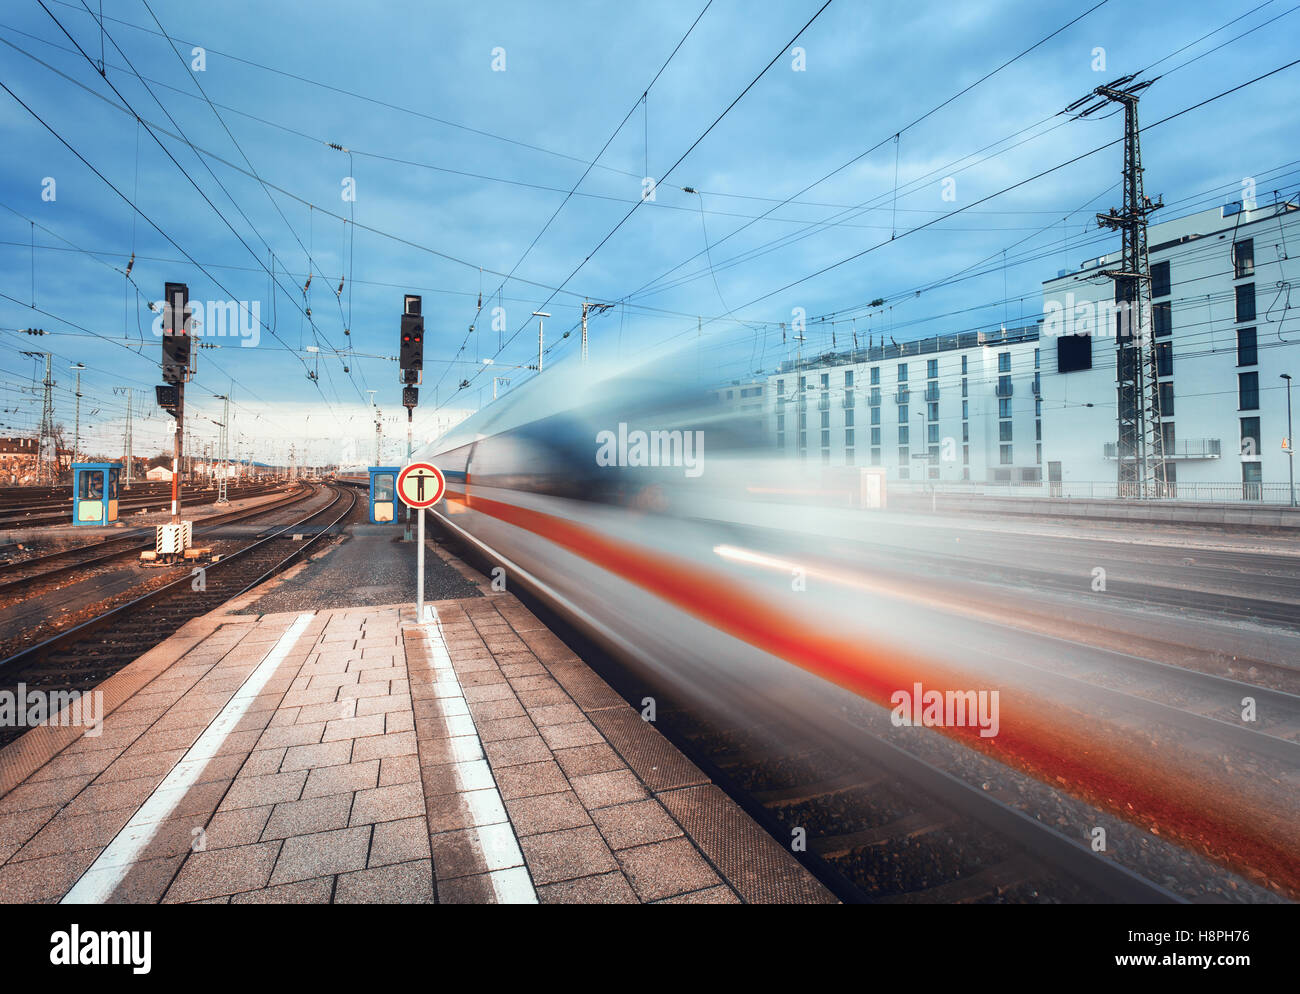 High speed passenger train on railroad track in motion. Blurred commuter train. Railway platform in the city. Railway station in Stock Photo